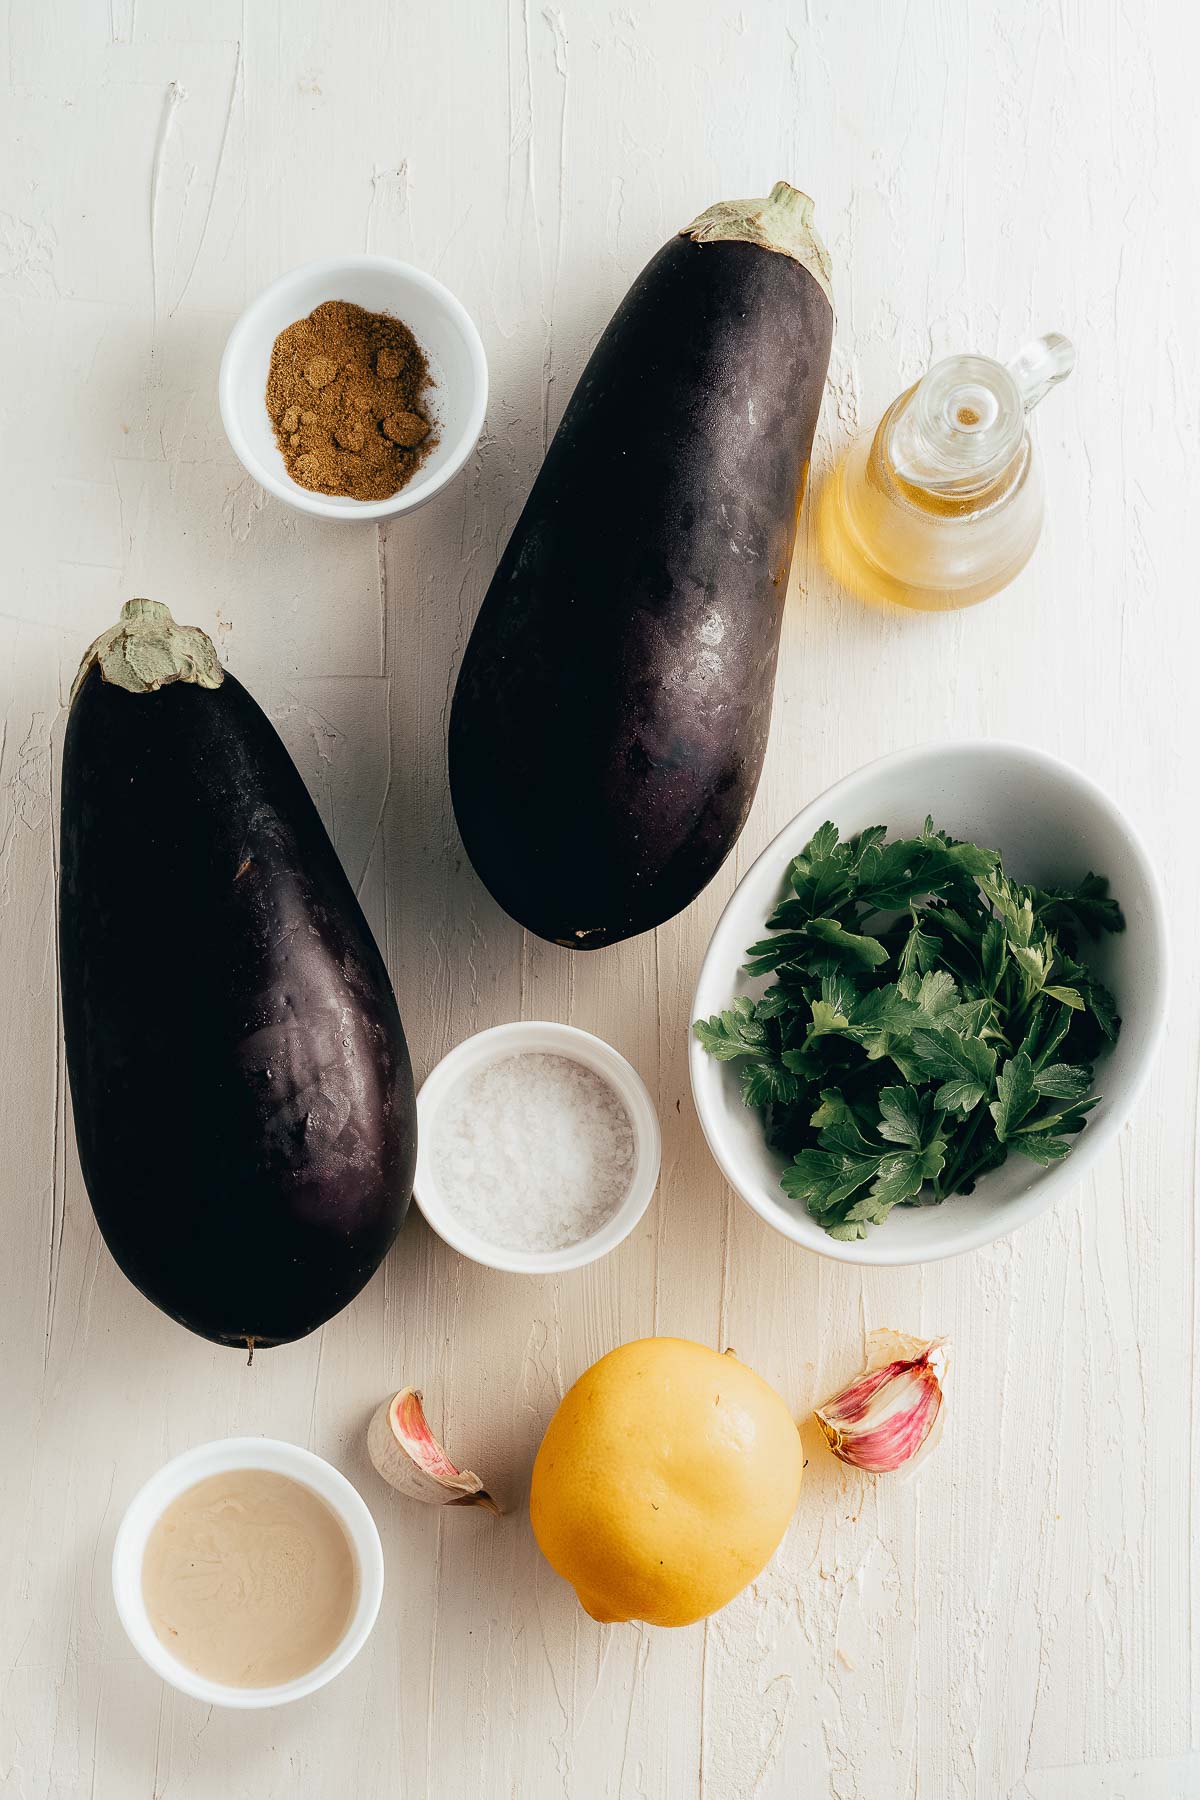 two large eggplant, lemon, and small white bowls of lemon juice, spices, olive oil, salt and parsley